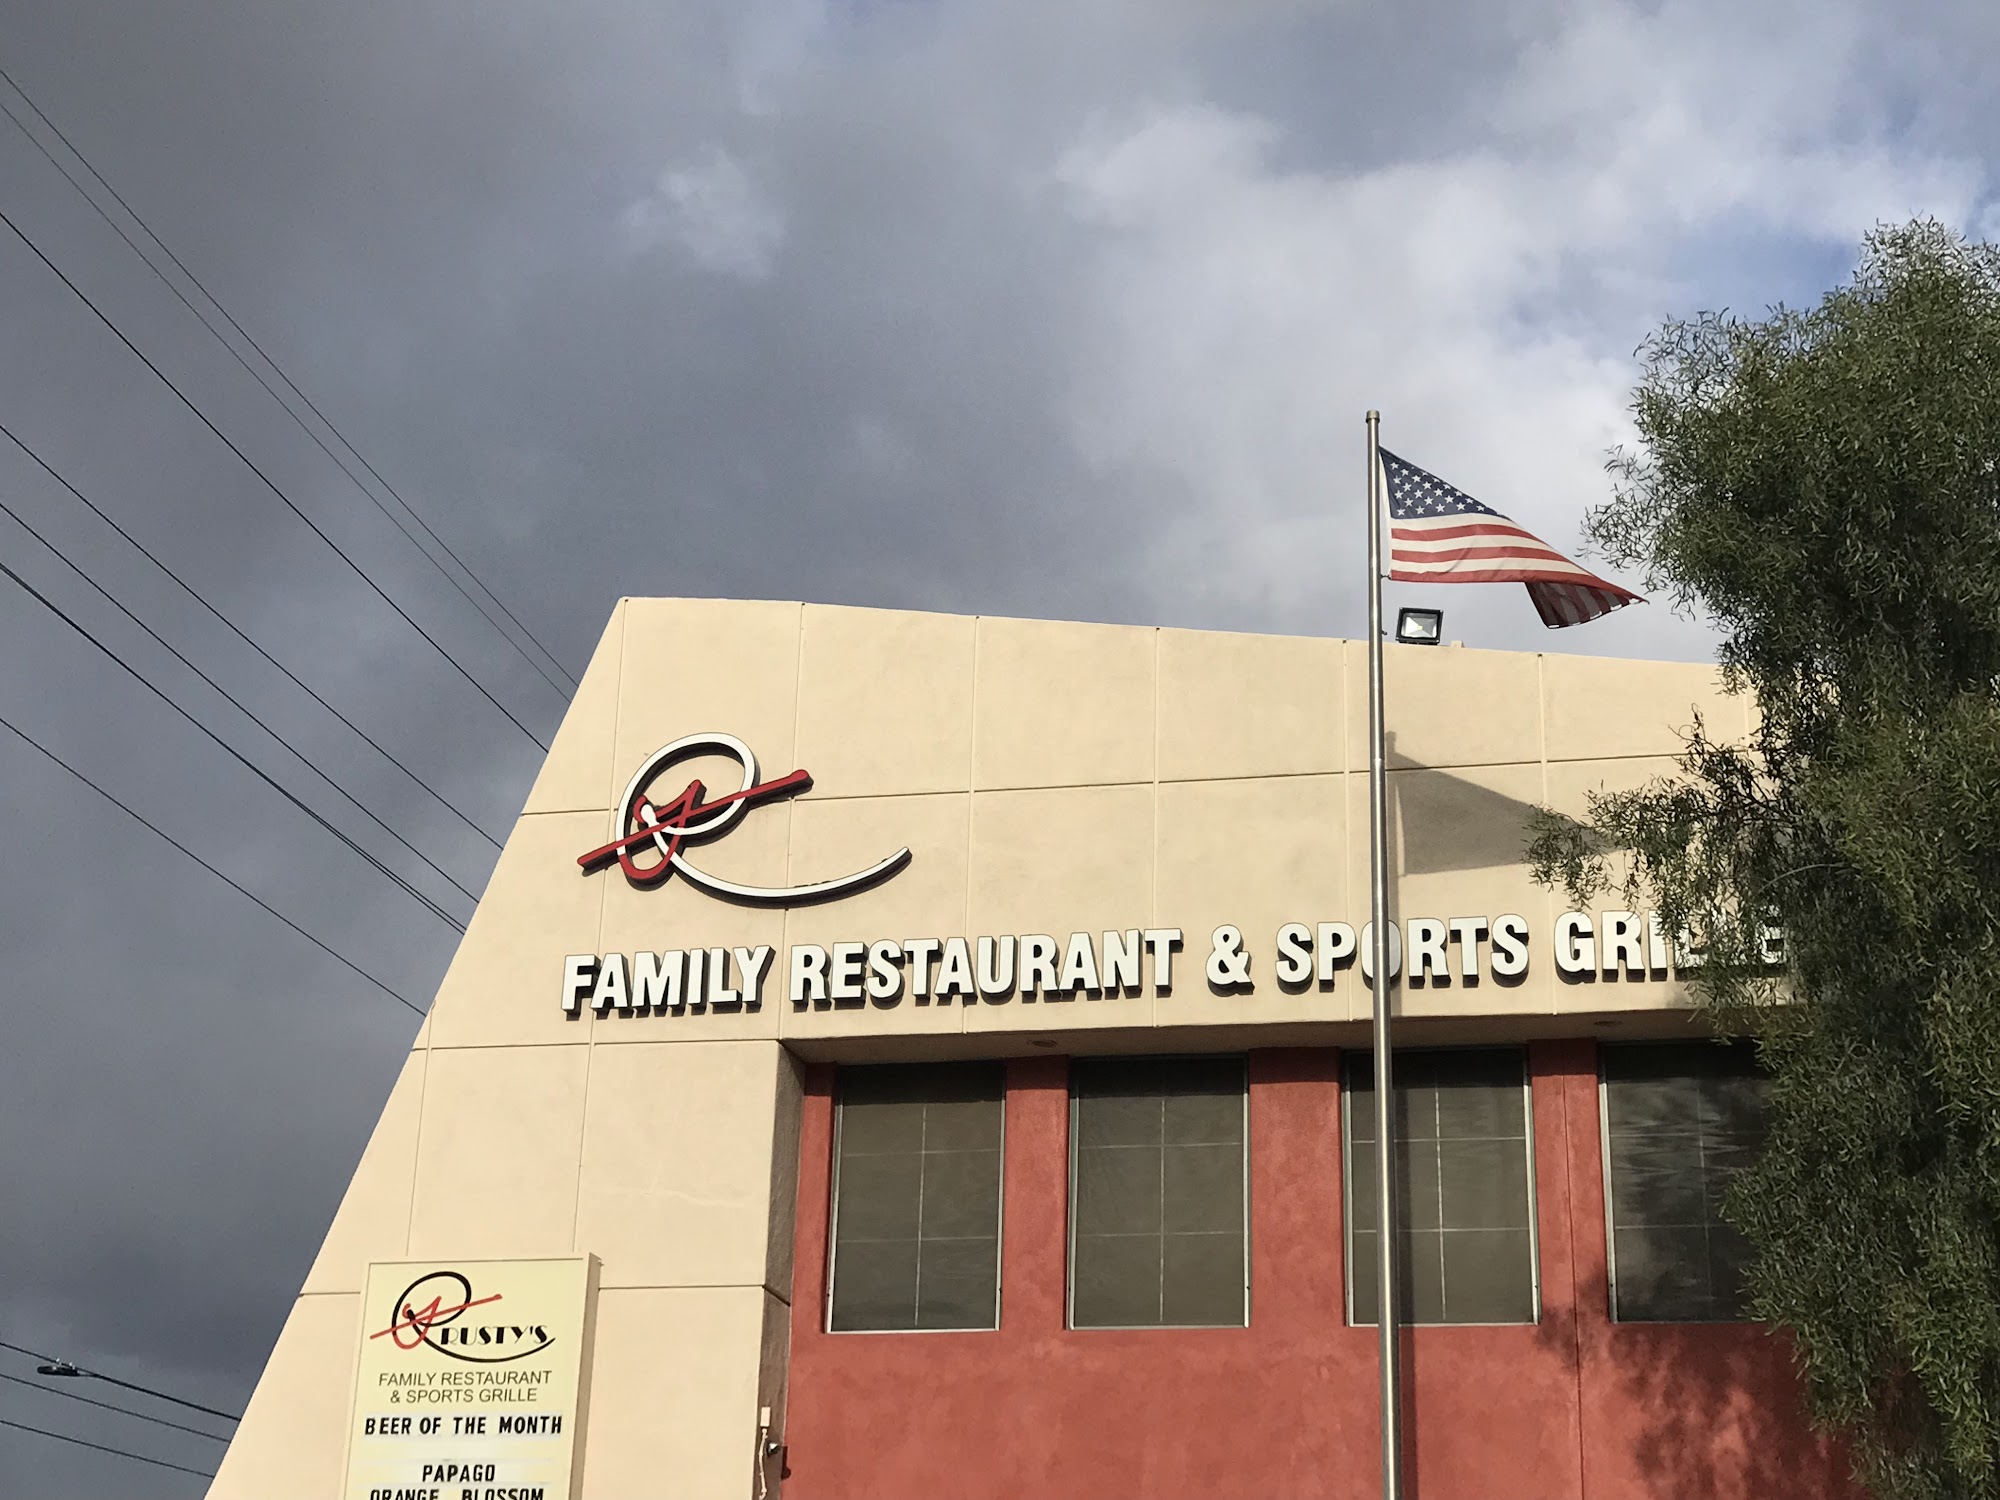 Rusty's Family Restaurant & Sports Grille